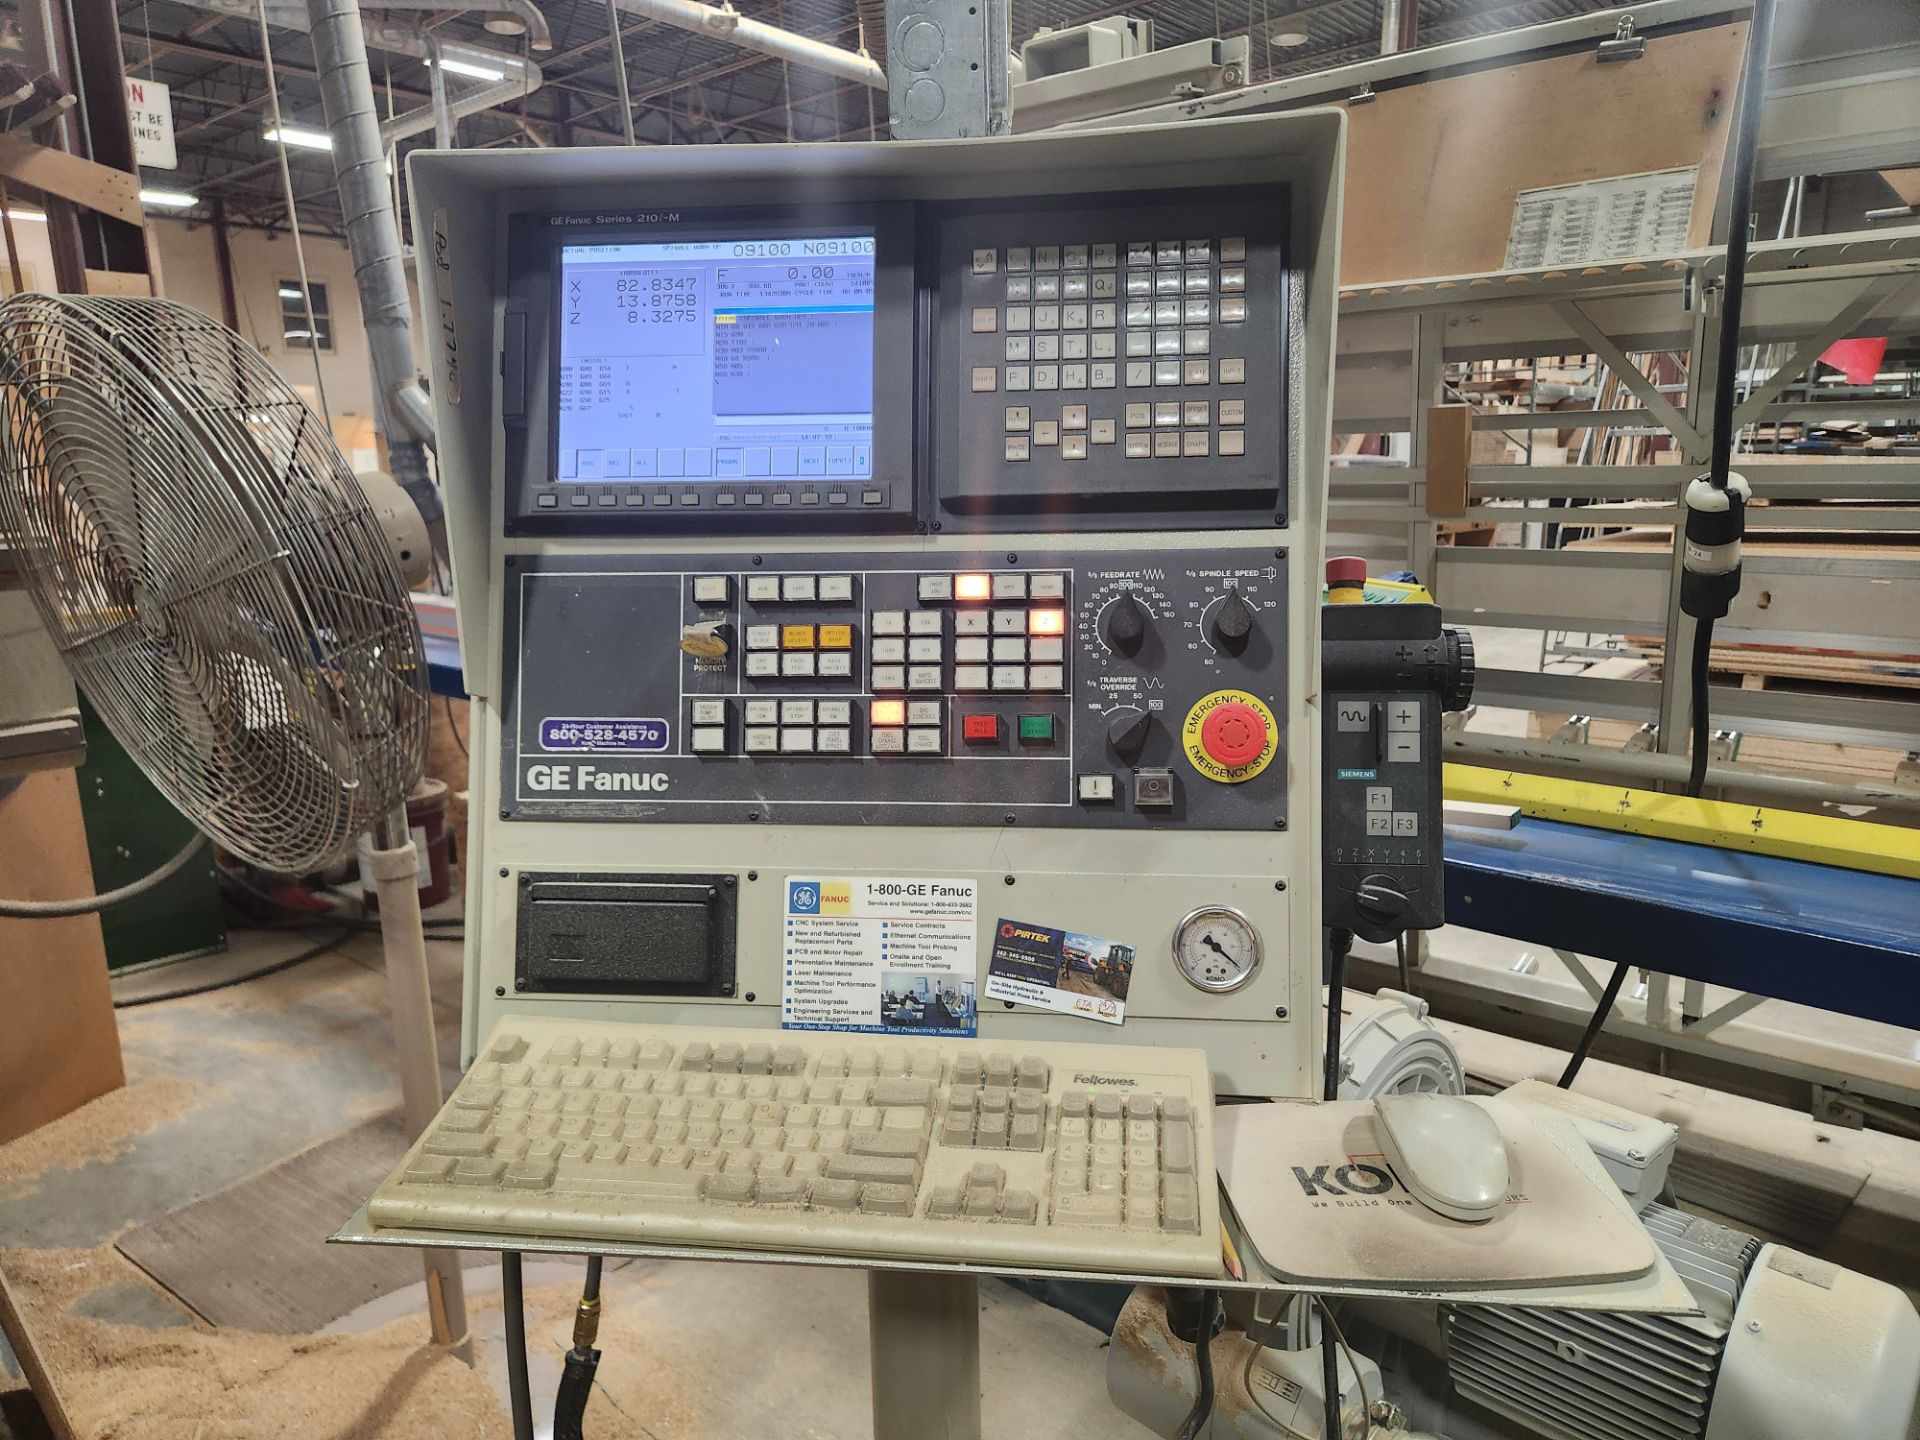 2001 Komo VR 510 Mach One, CNC Router - Image 2 of 12